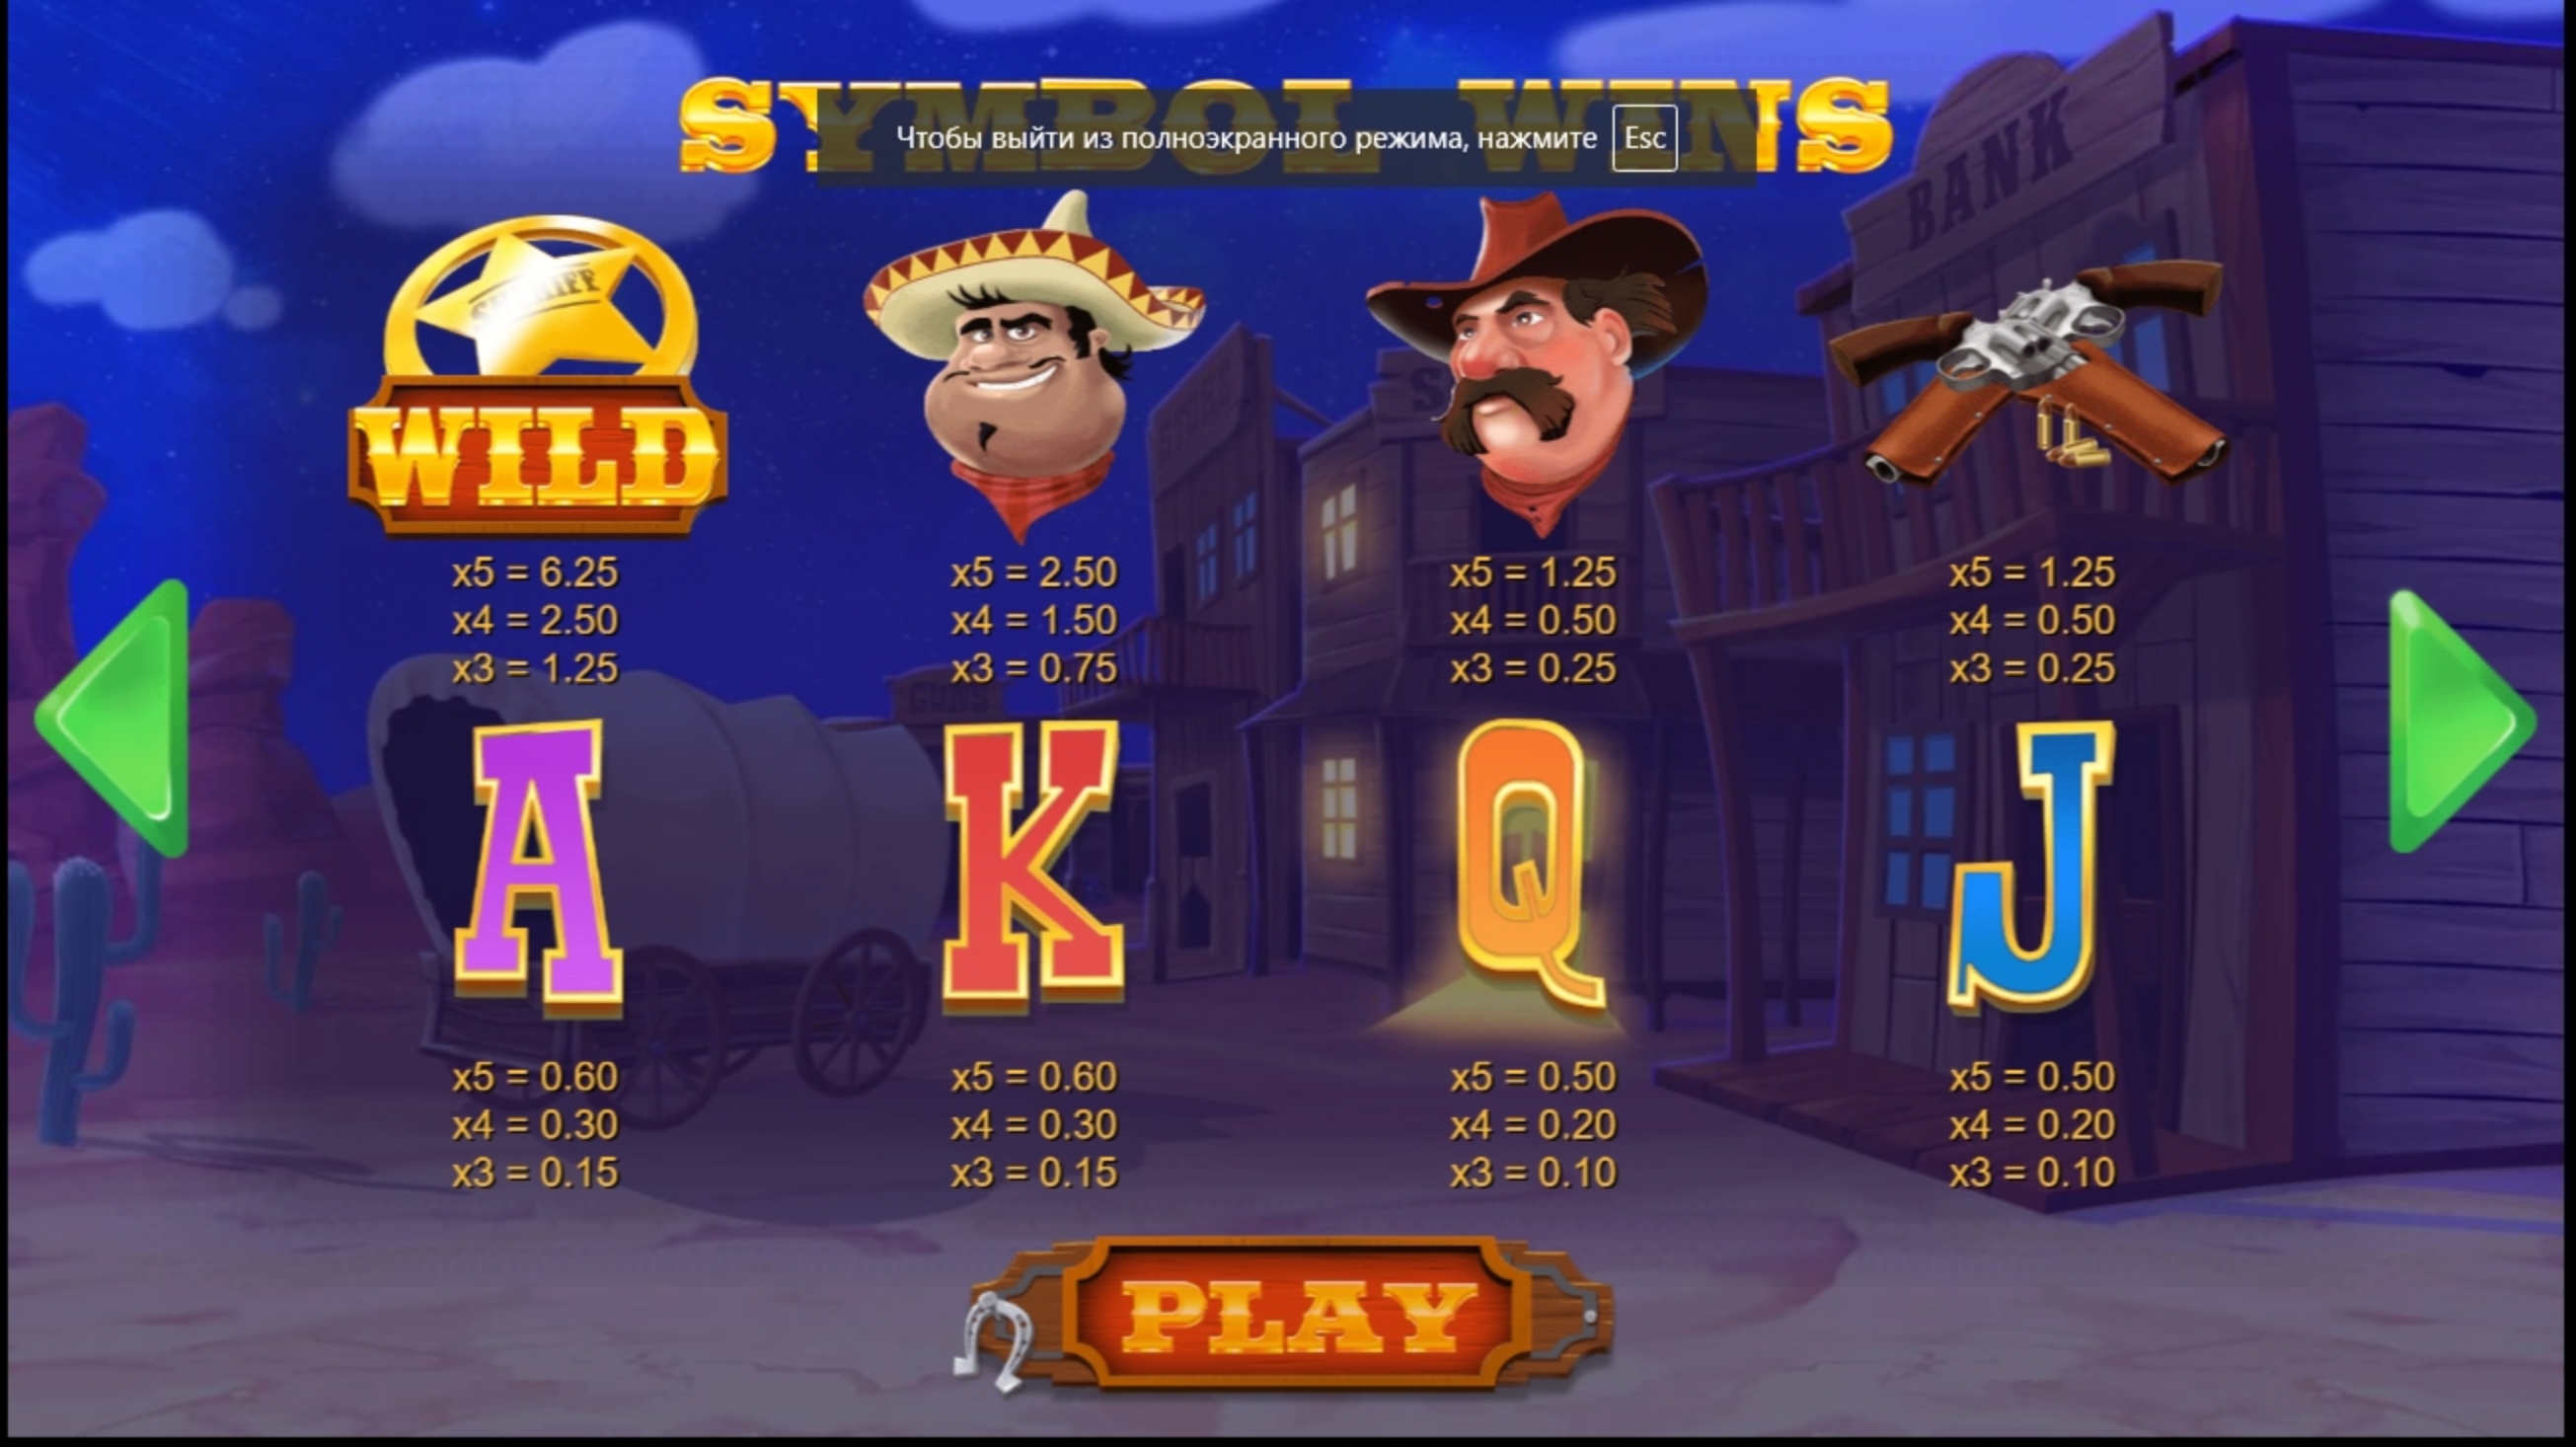 Info of Wild Bandidos Slot Game by 7mojos